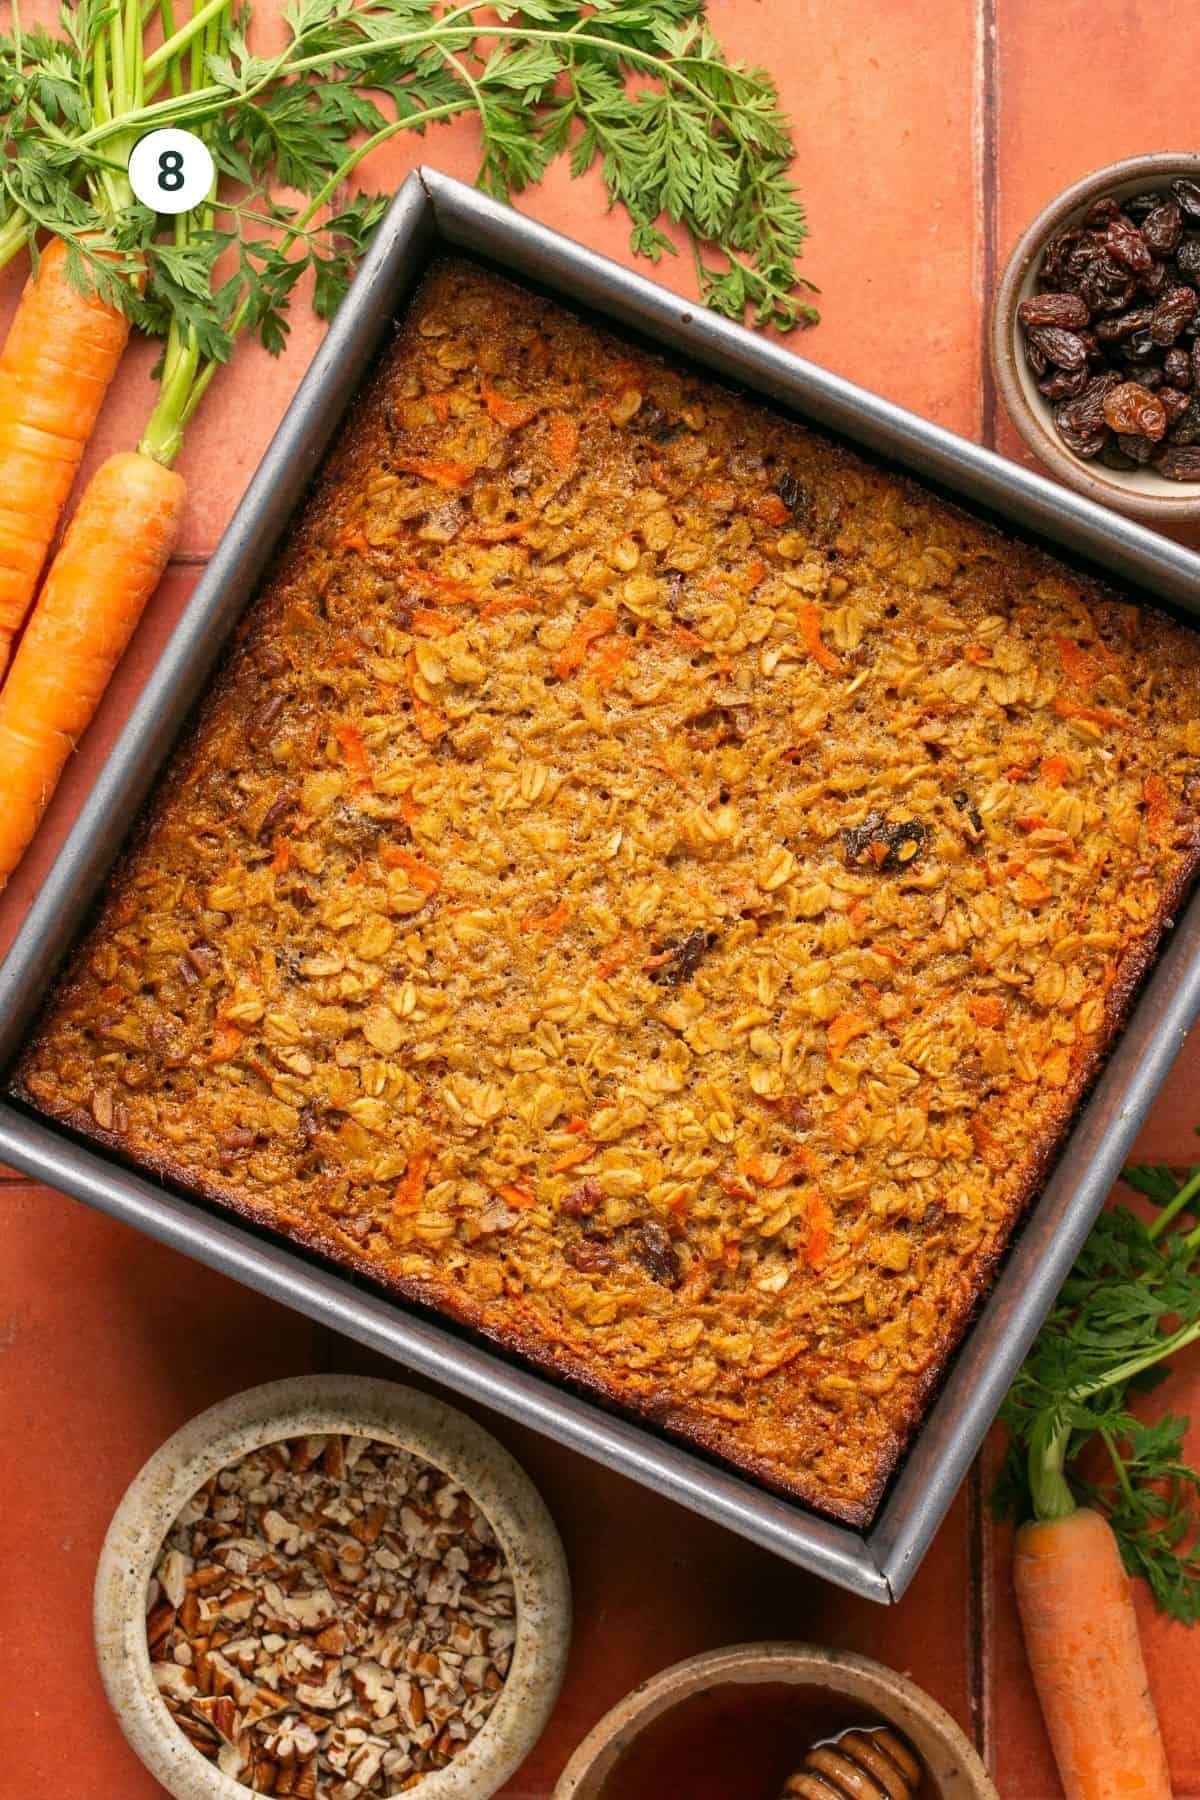 Fully baked oatmeal in a baking dish. 